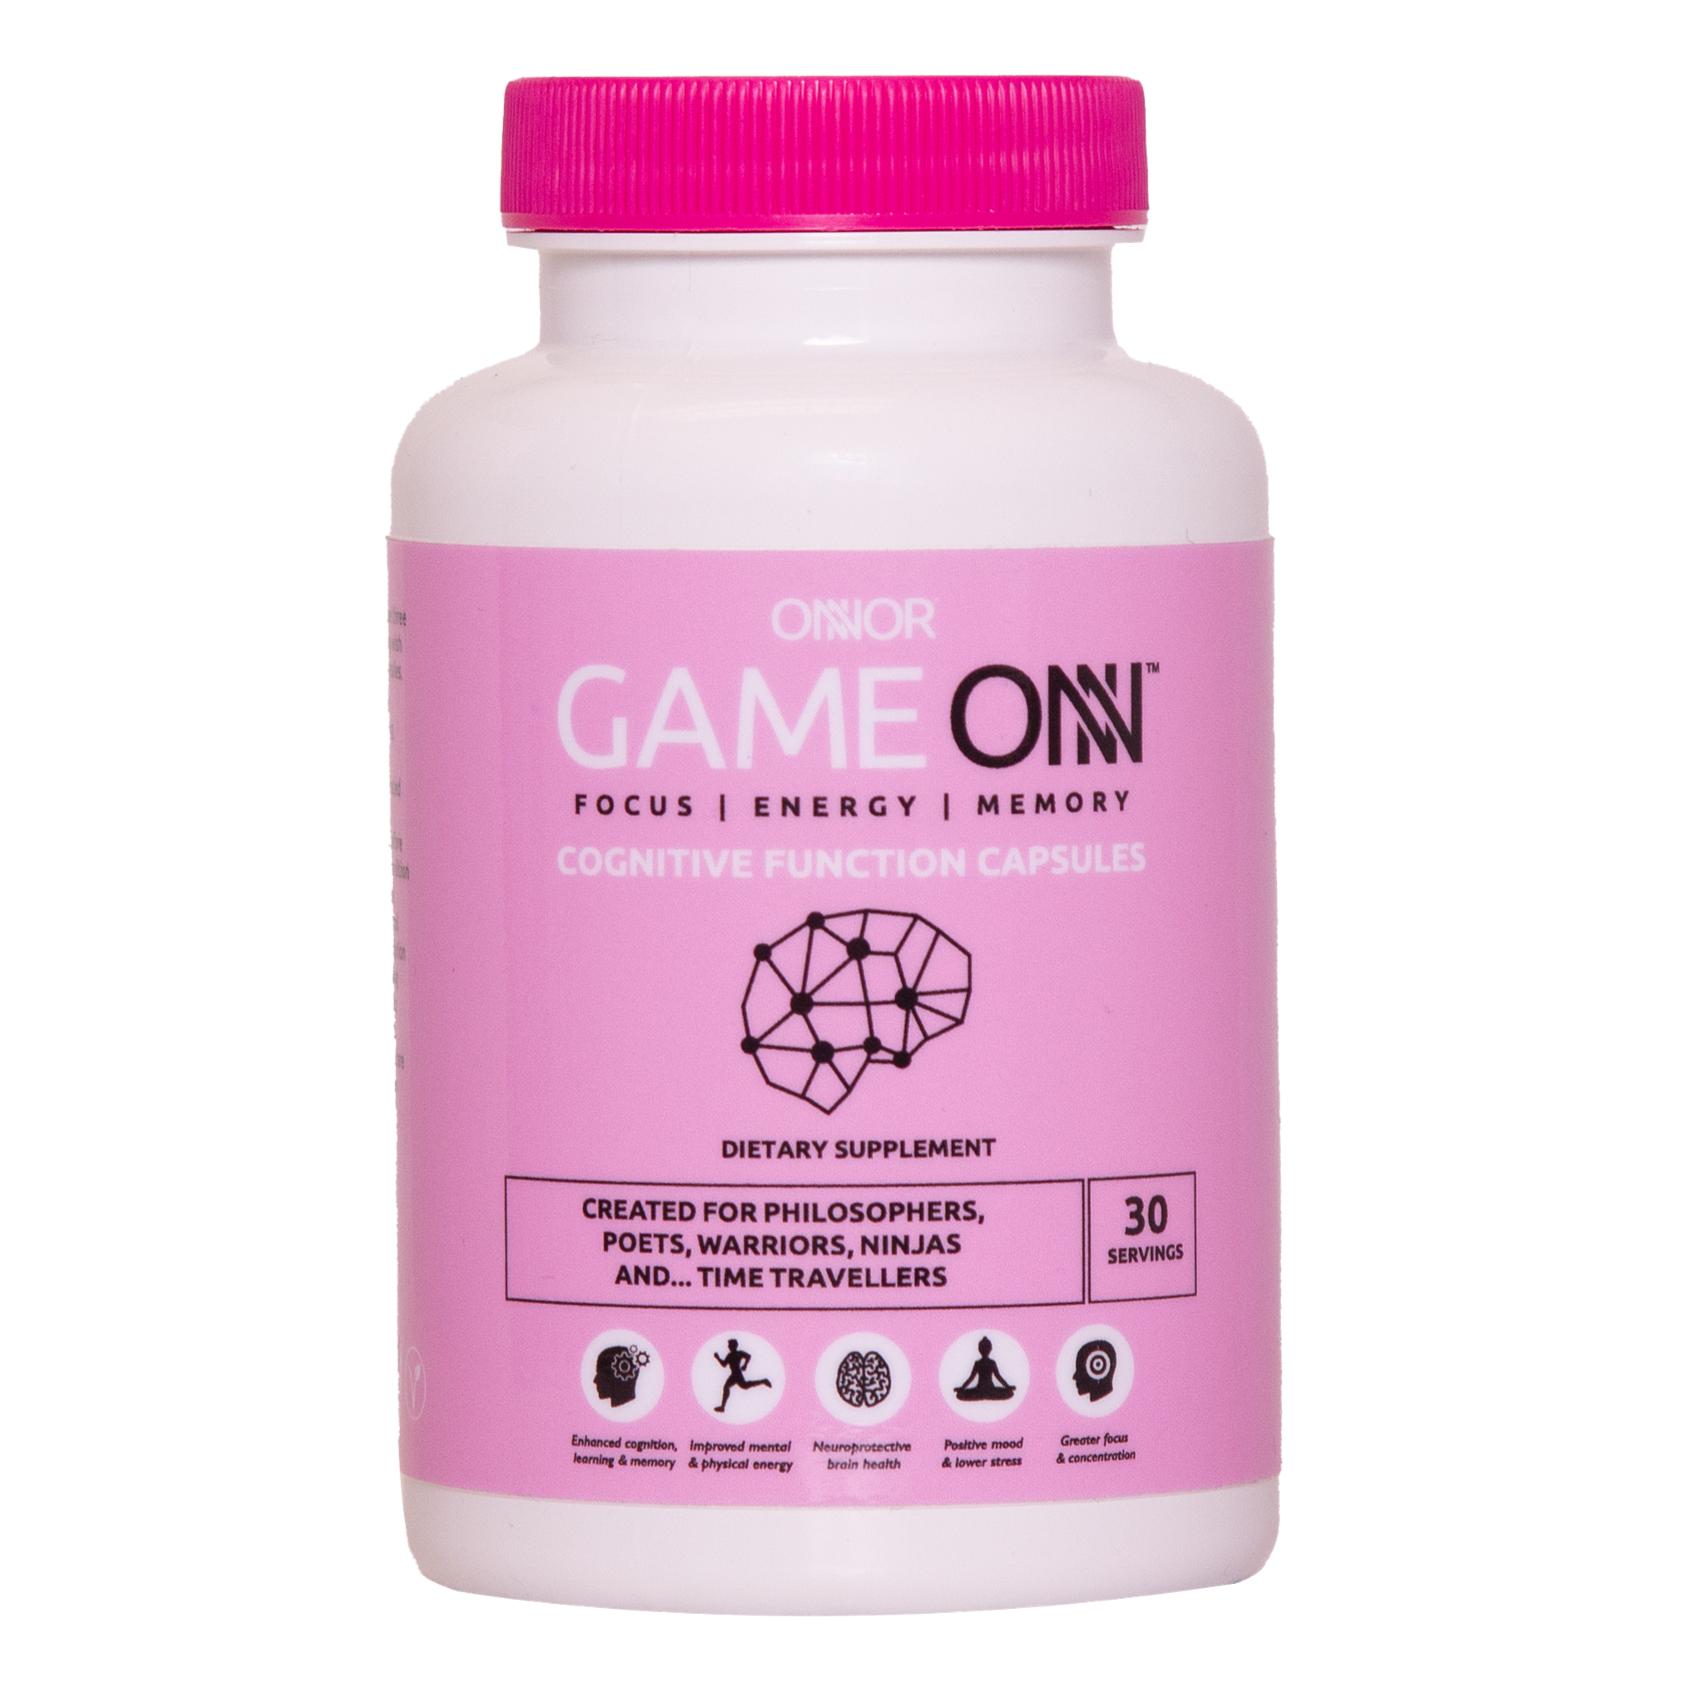 Cognitive Function Capsules – Game ONN Nootropic Capsules – ONNOR PINK Single Pack – 150mg Caffeine Per Serving – Improves Memory – 150mg Caffeine Per